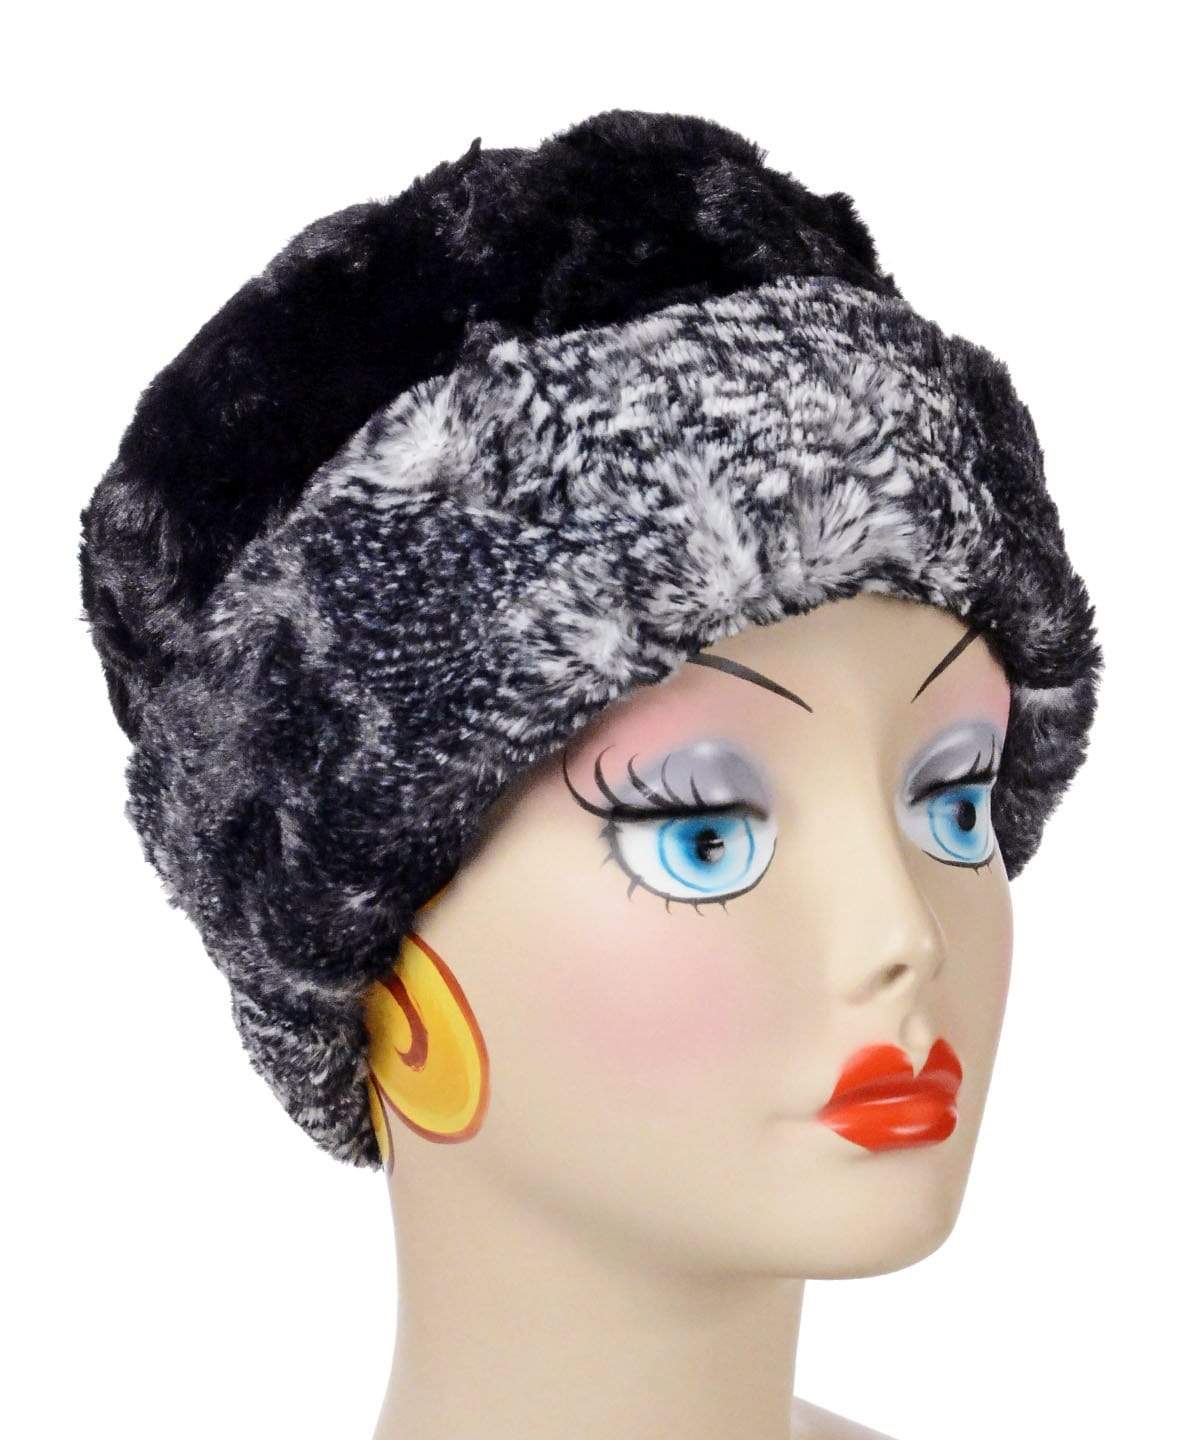   Women&#39;s Cuffed Pillbox on mannequin in reverse | Black Mamba Faux Fur with Cuddly Black  | Handmade USA by Pandemonium Seattle